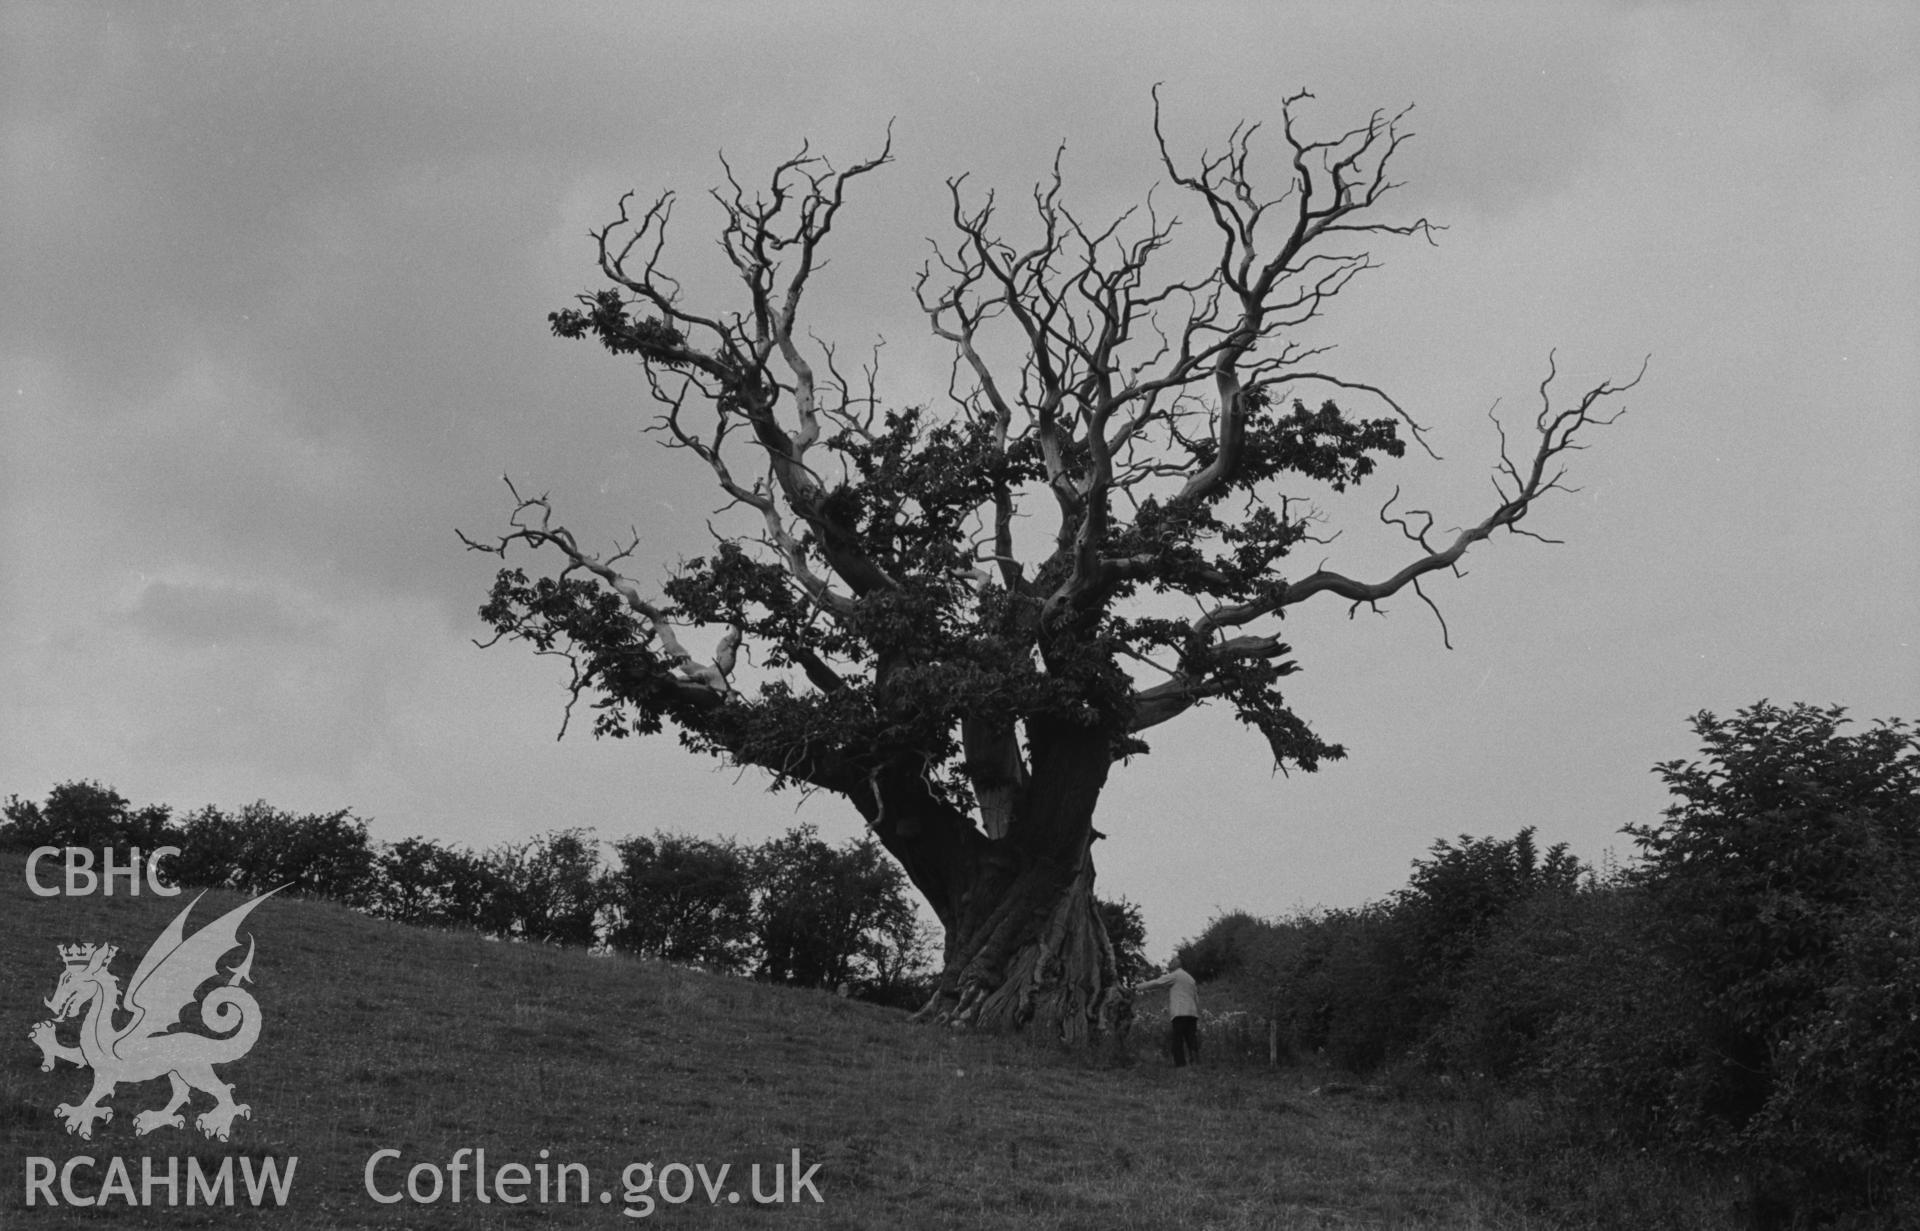 Digital copy of a black and white negative showing sweet chestnut tree in field above the road, 200m west of Dol-gwibedyn, Llanafan. The trunk measured 26ft in circumference. Photographed by Arthur O. Chater in August 1967. (Looking north from Grid Reference SN 681 716).